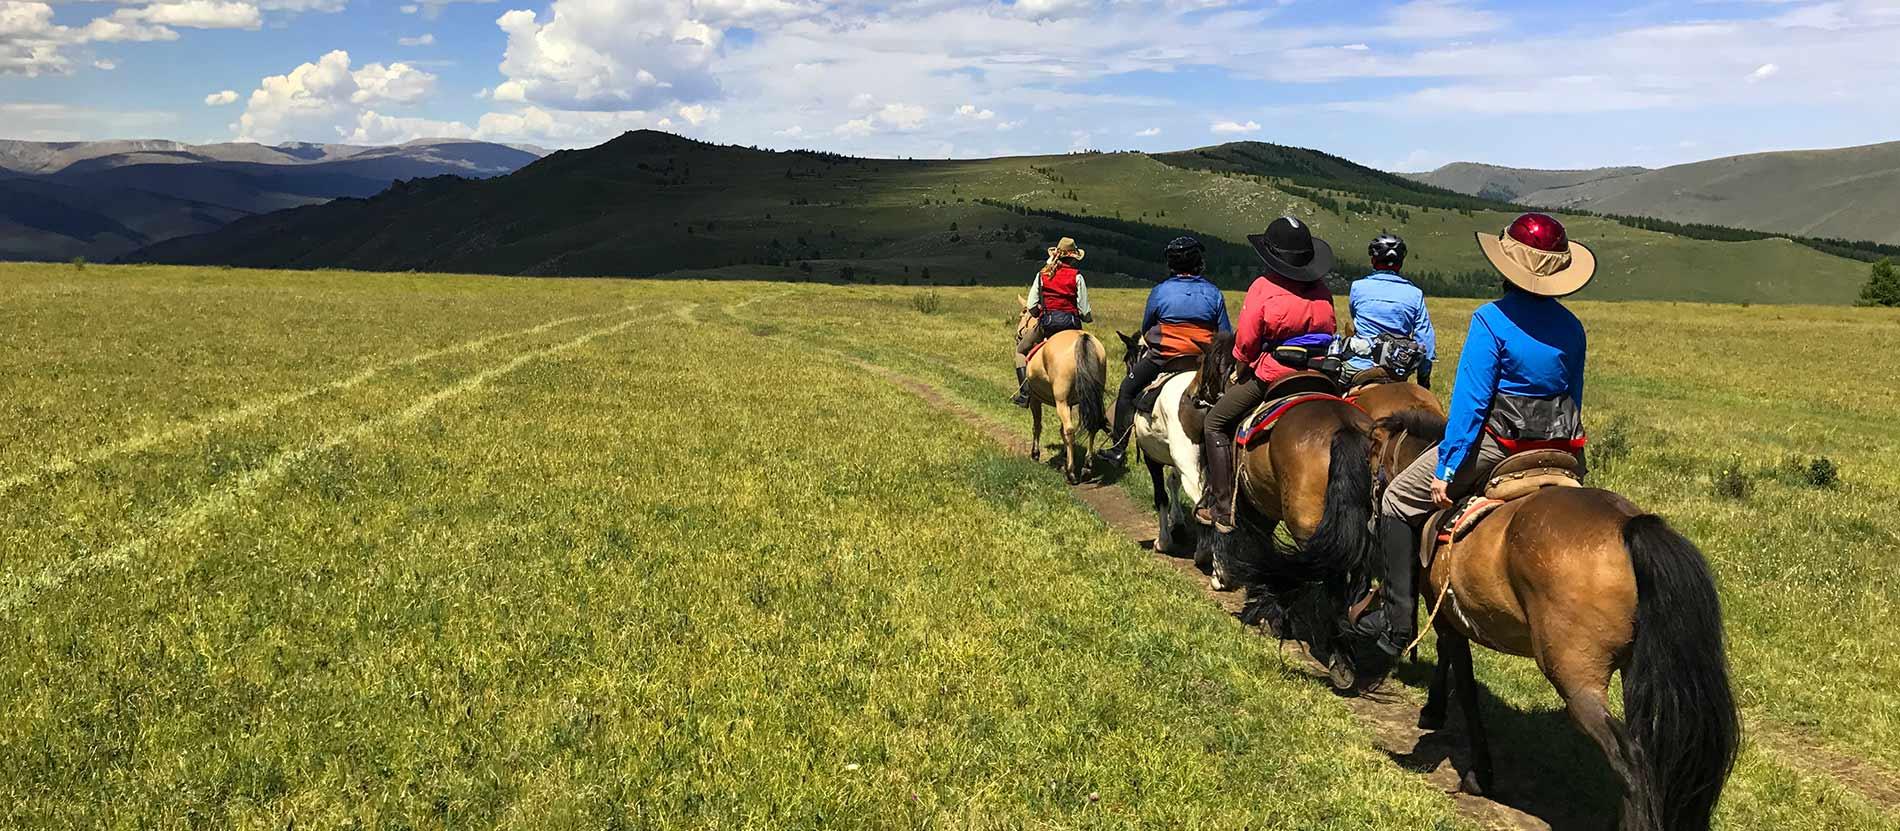 Horse riding in Mongolia